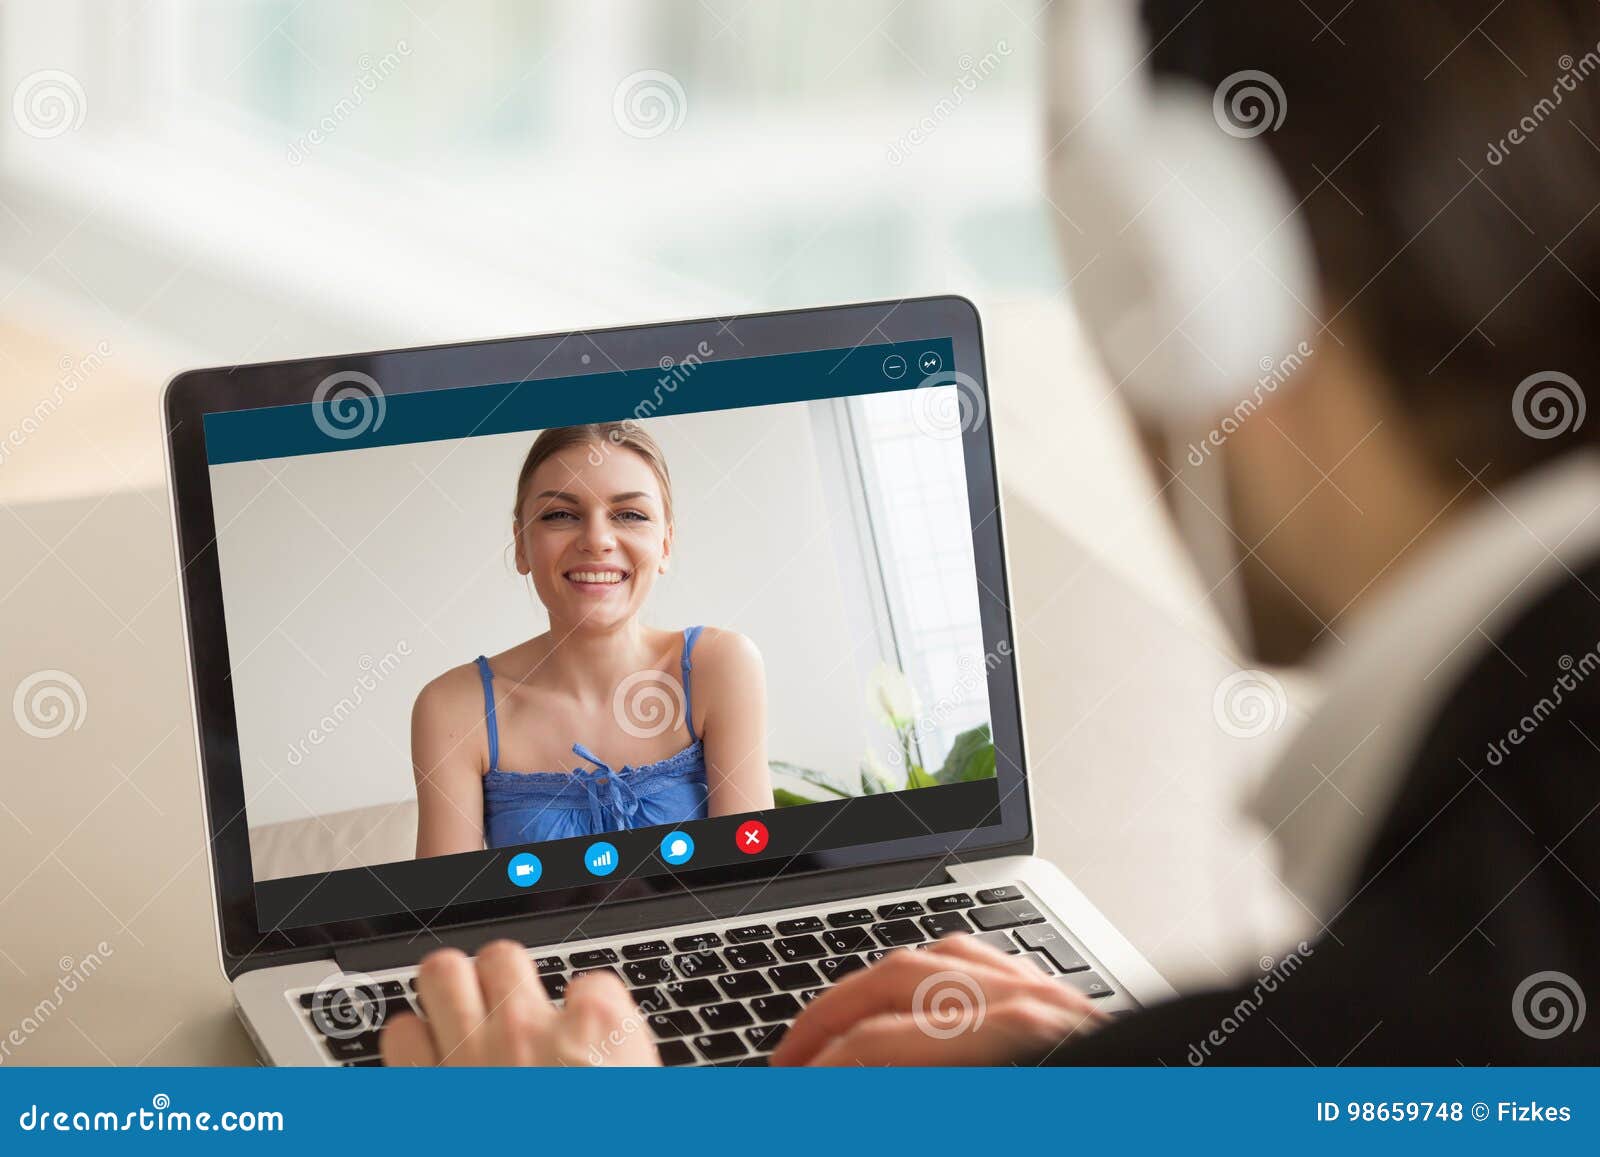 free video chat with women